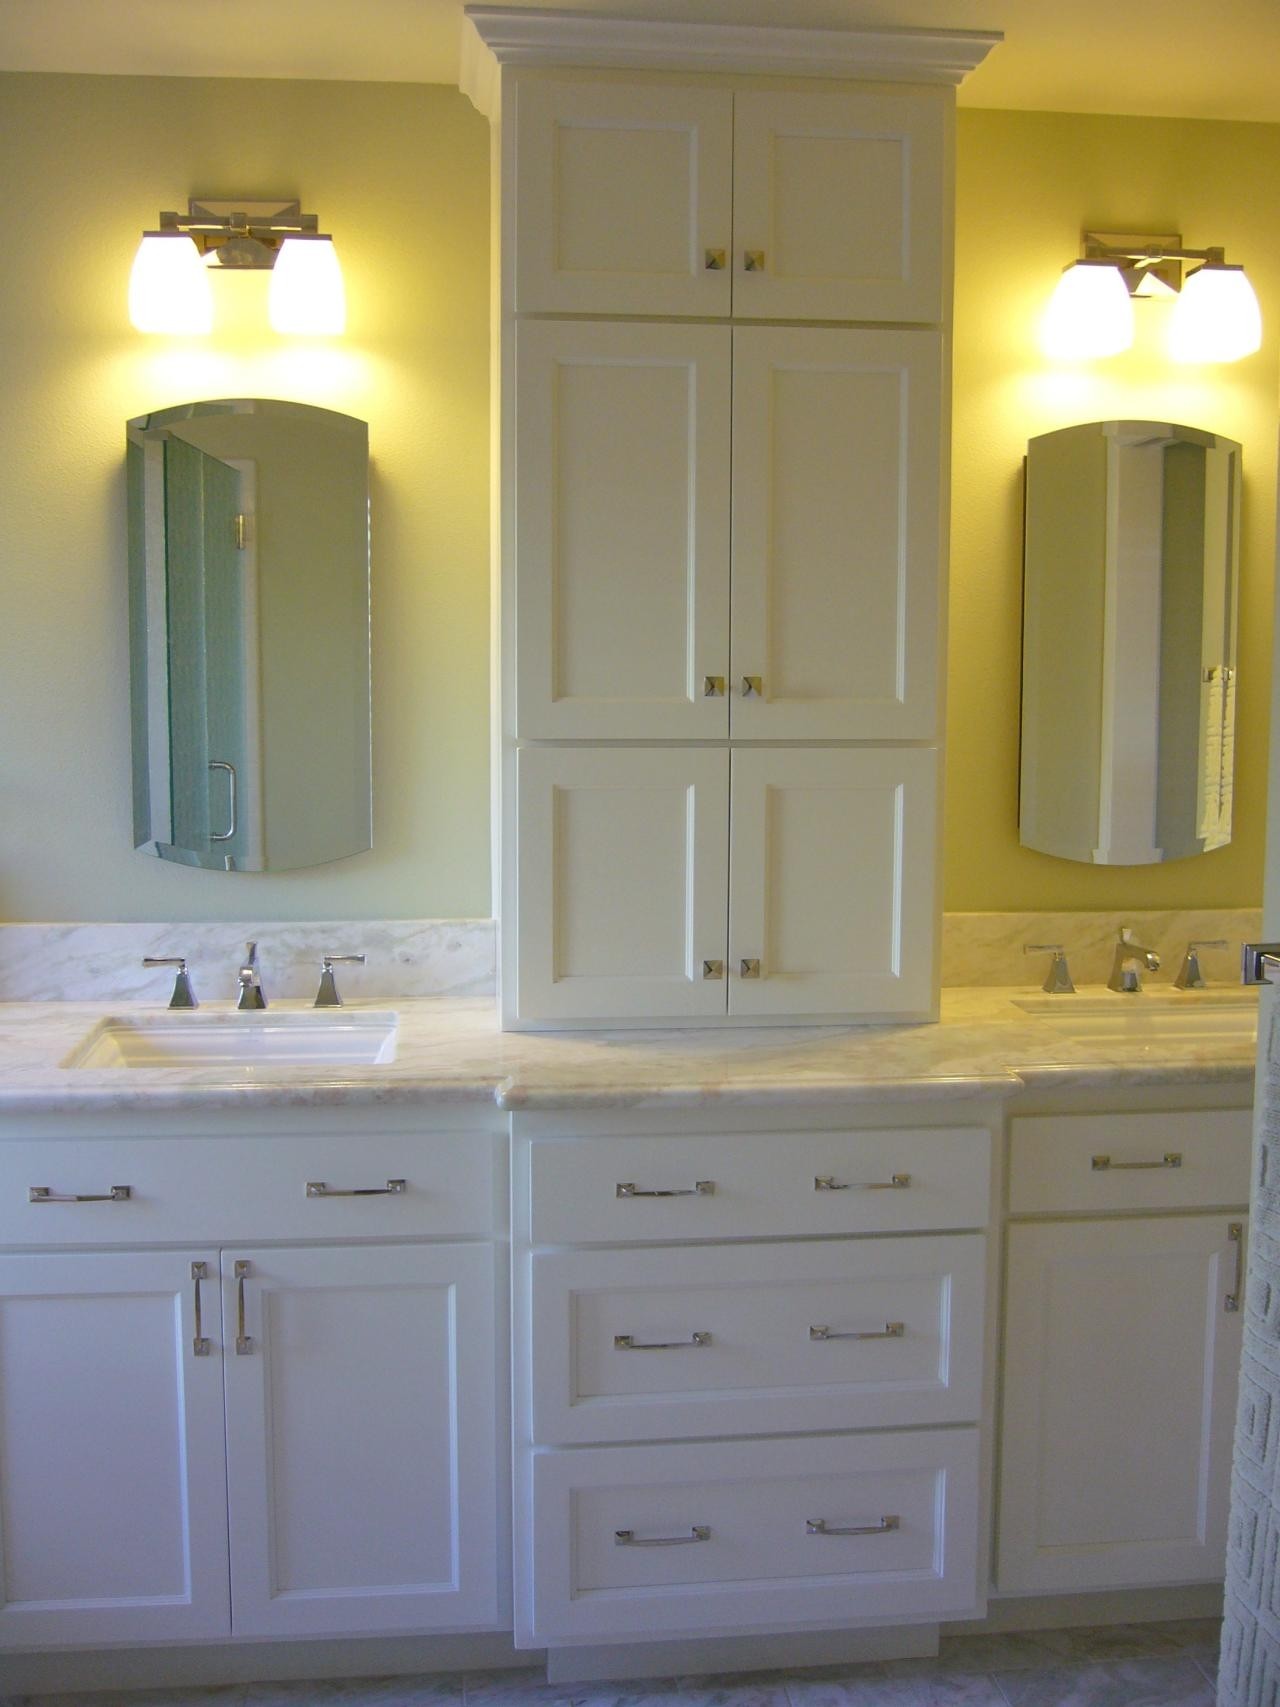 Custom bathroom cabinets to divide his and her vanity space